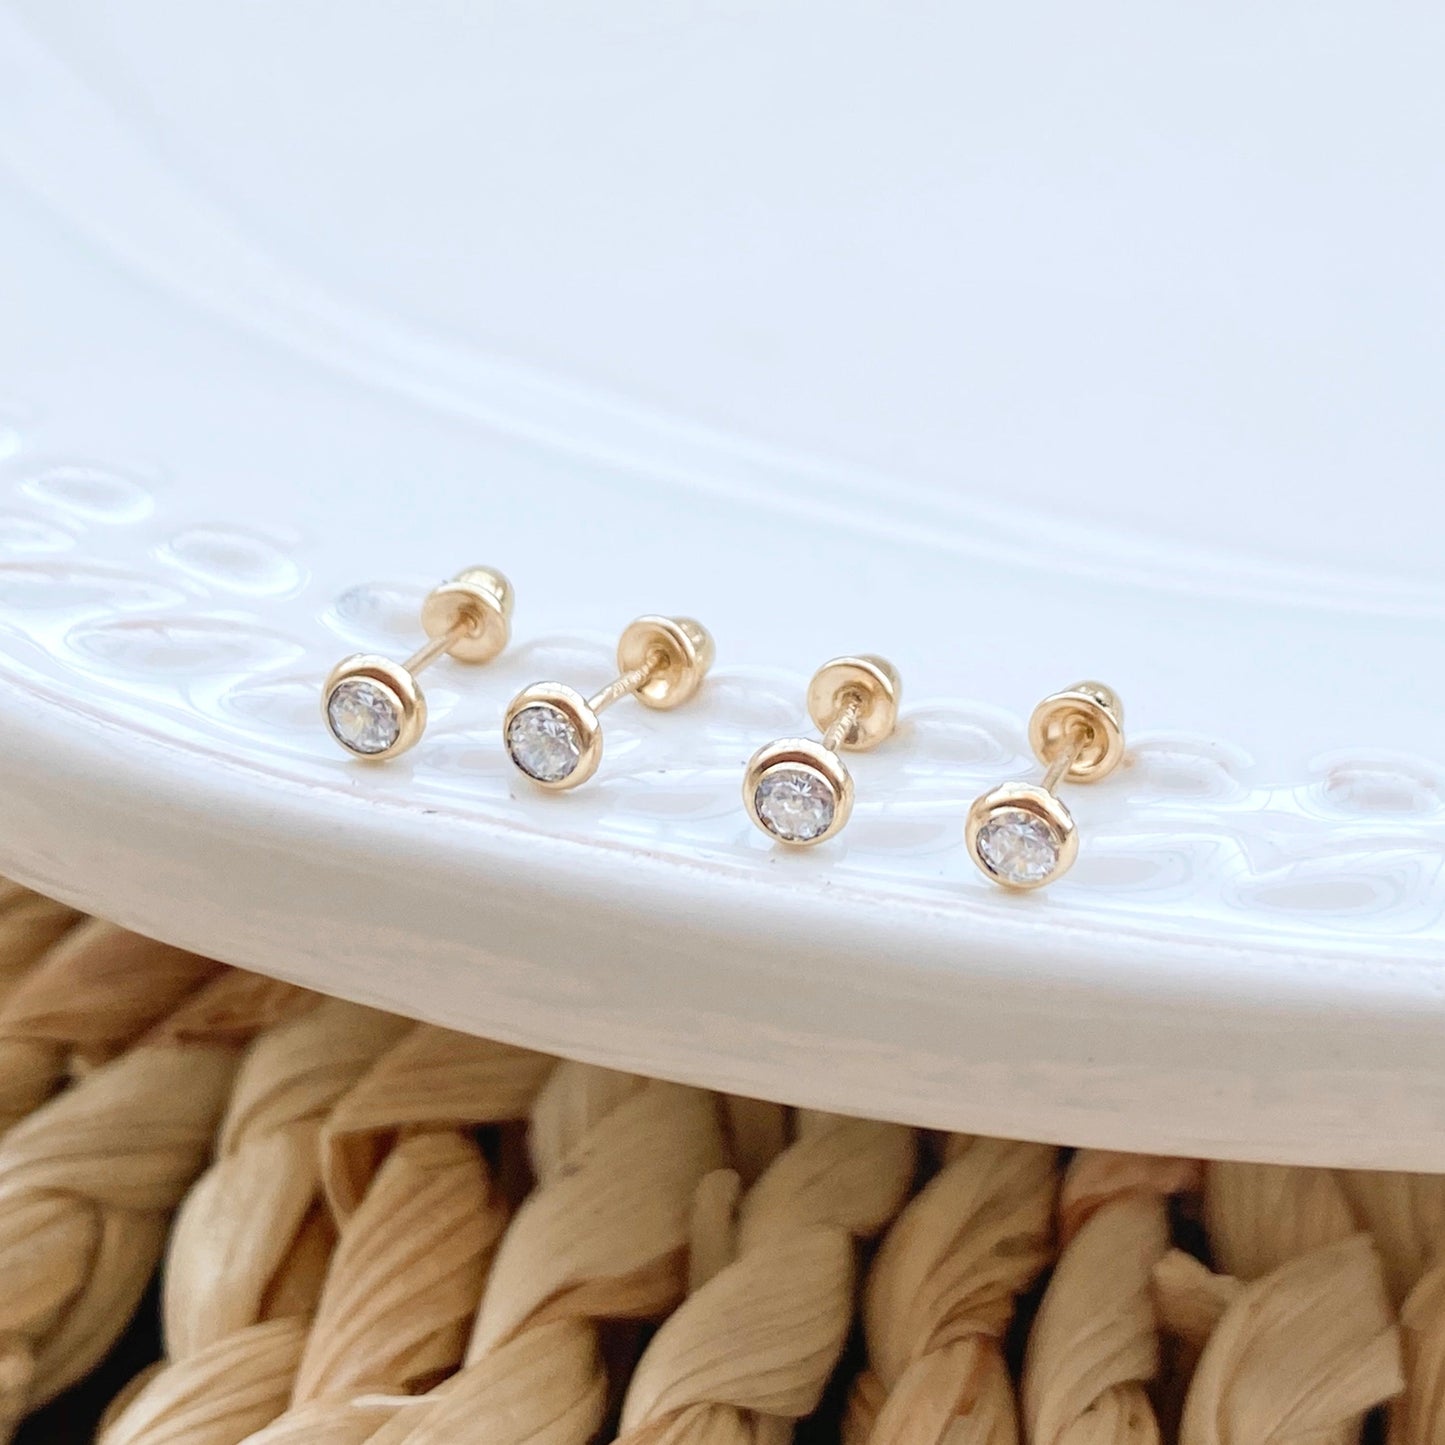 Our 14K solid gold bezel stud earrings are the perfect size for a unisex gift or women's everyday wear. These tiny gold stud earrings have 3mm bezel setting and are crafted from polished solid gold. 